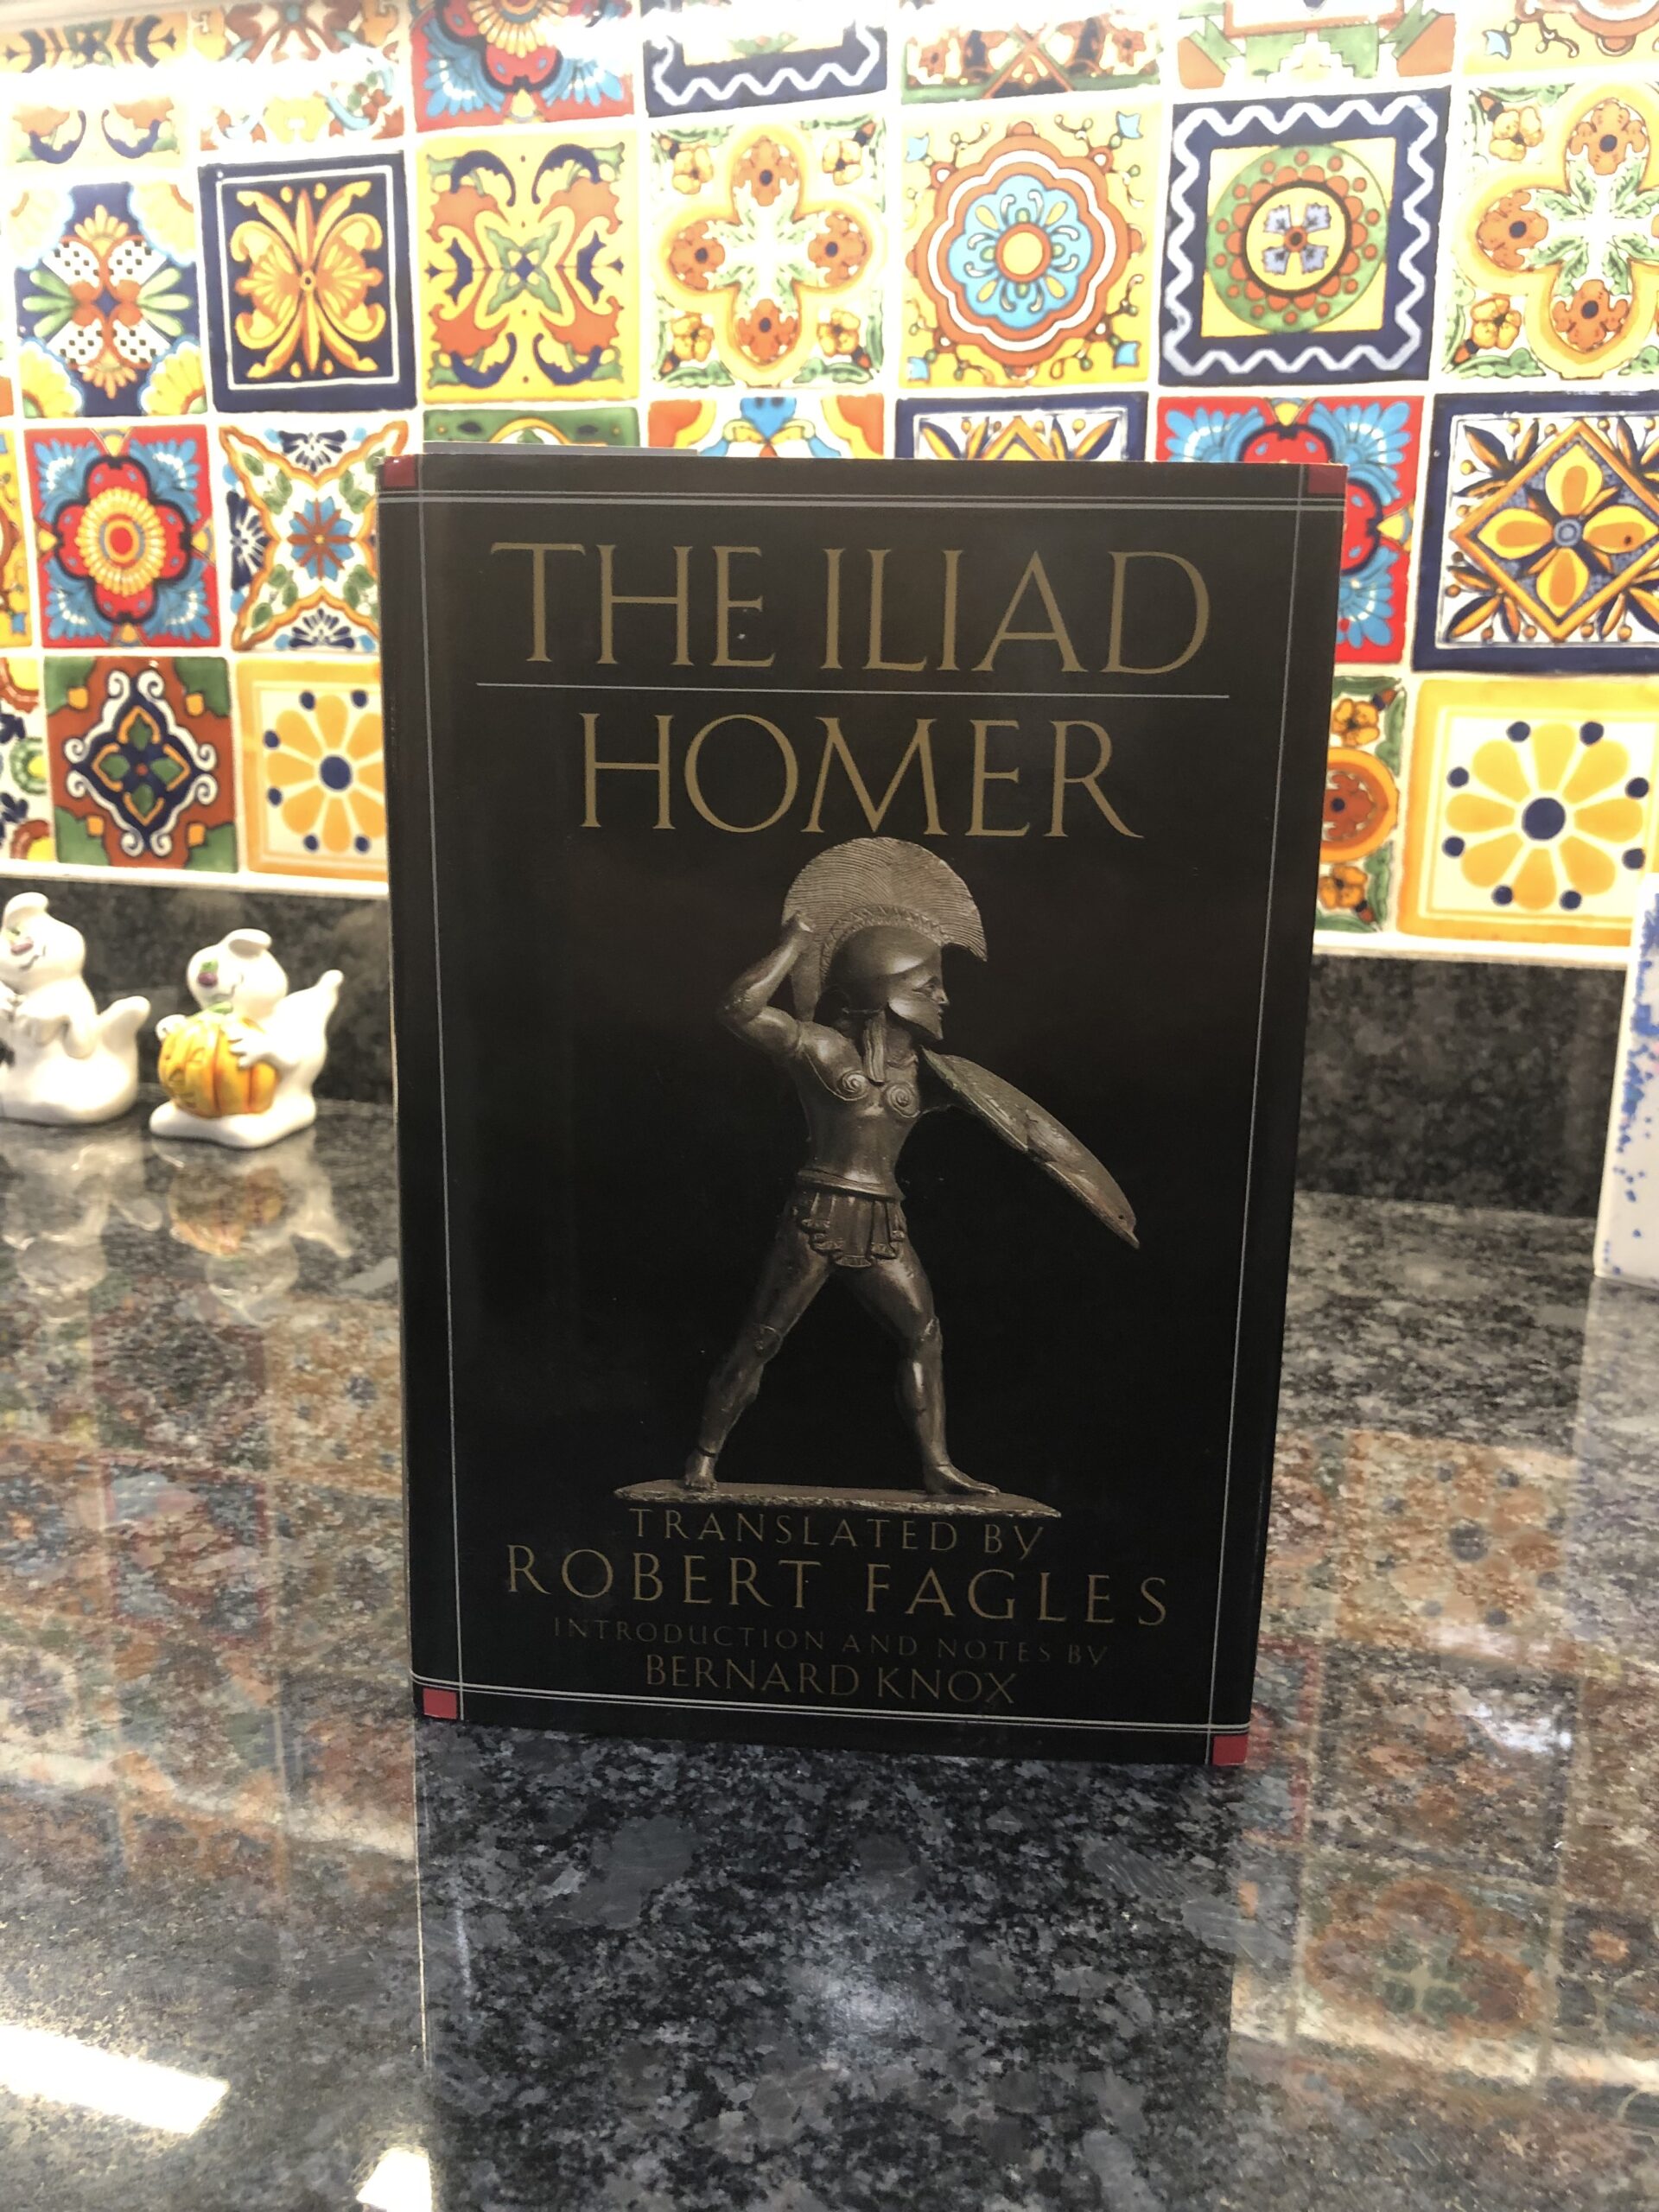 Front view of the Iliad. A black book with a hoplite displayed across the cover.